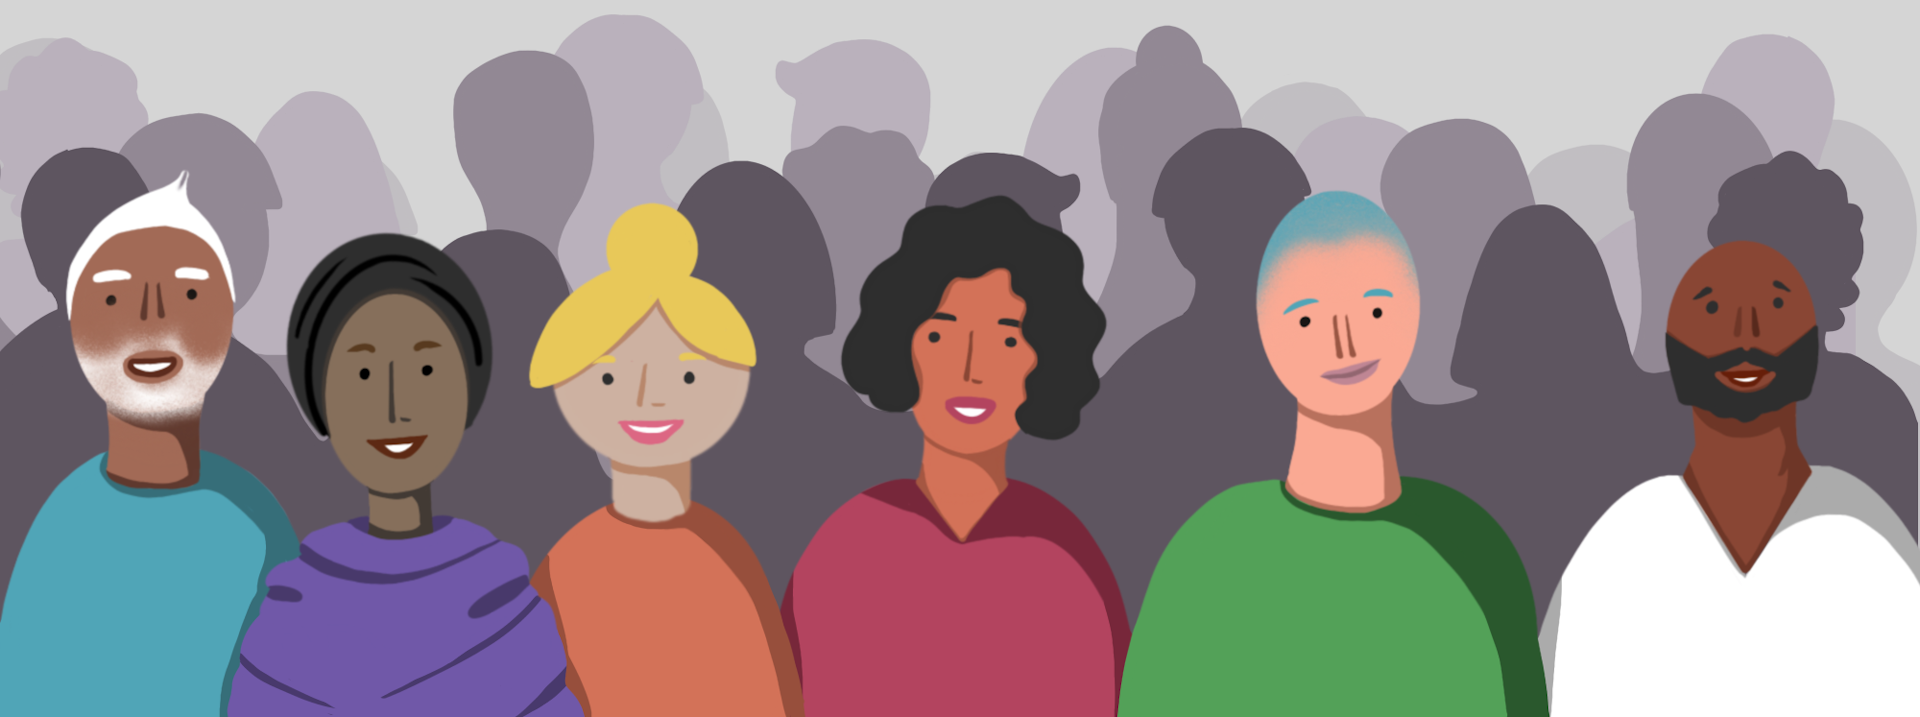 An illustration of a group of people, all shown smiling and wearing different coloured tops, with silhouettes behind them to depict a crowd.